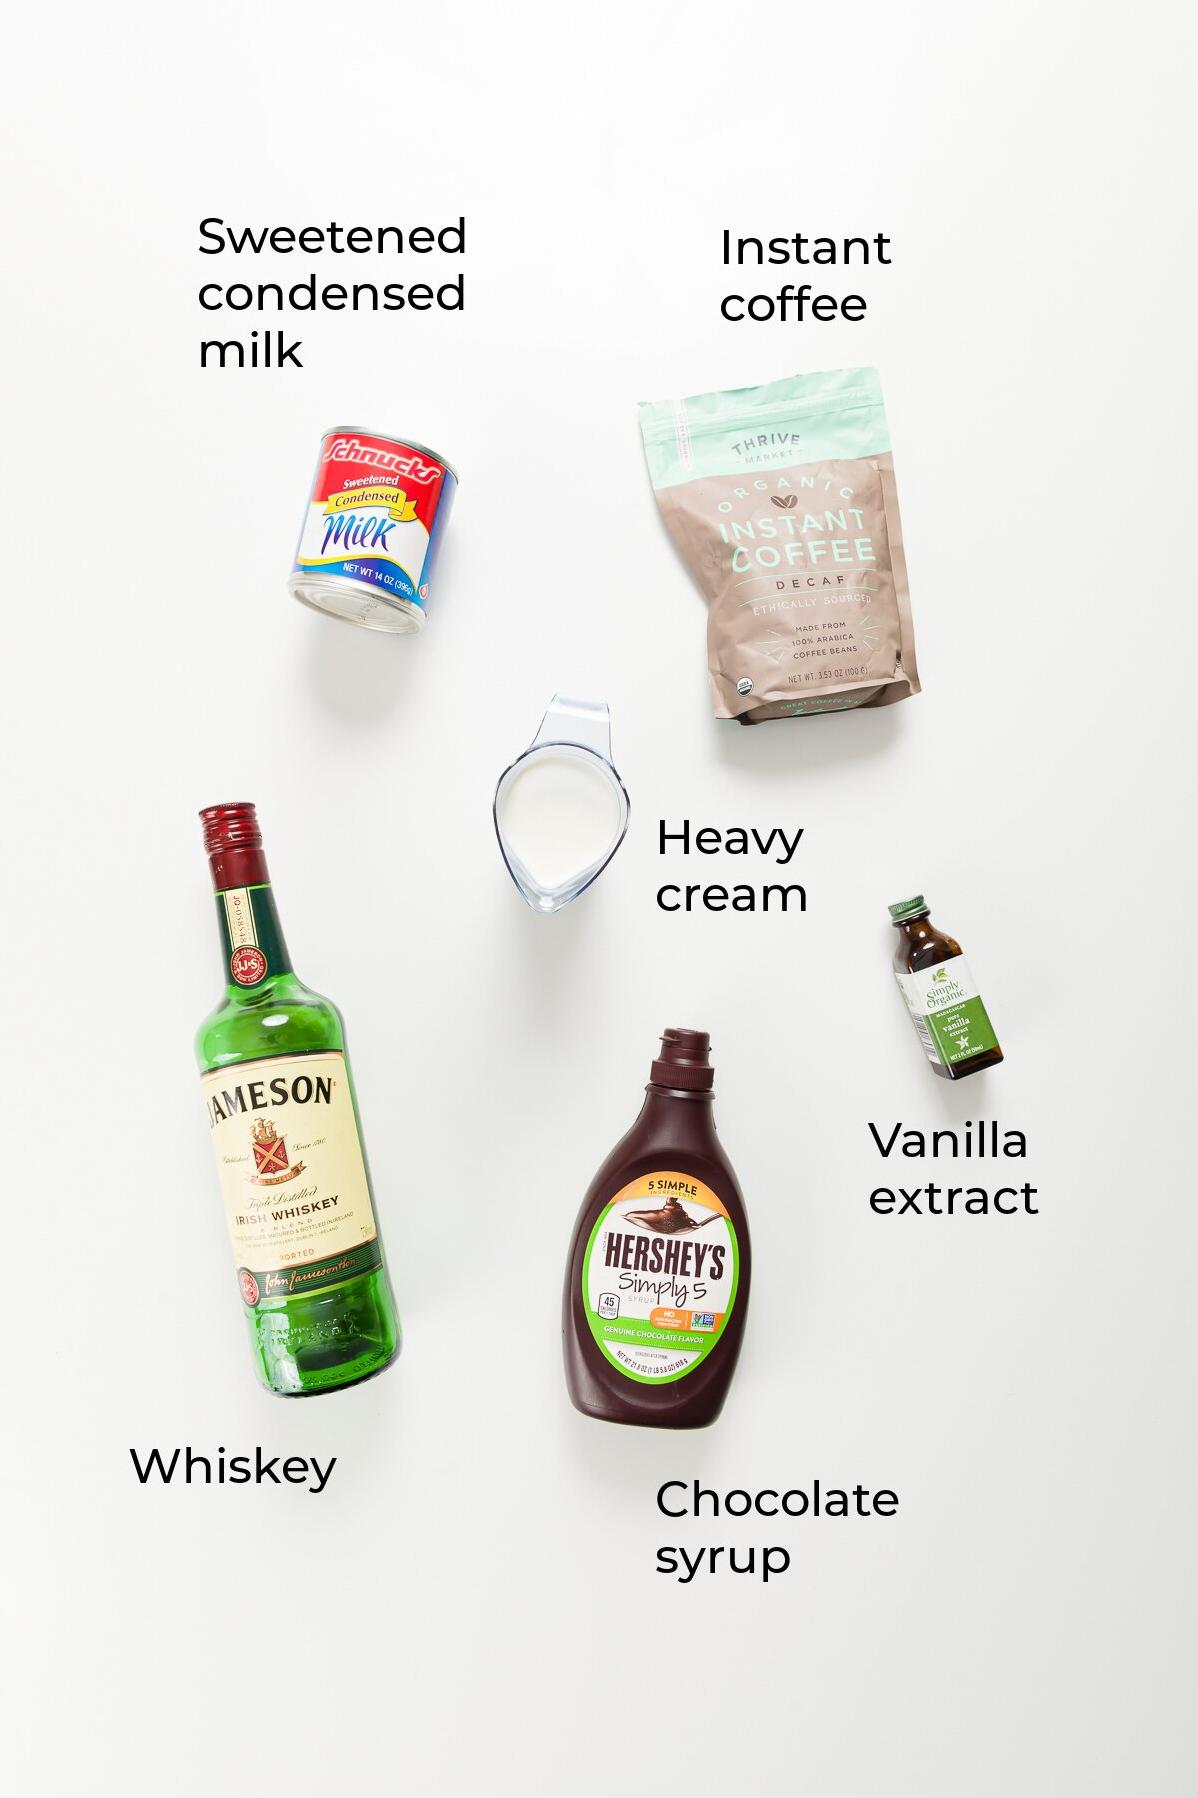  Who knew making your own Bailey's was so easy?